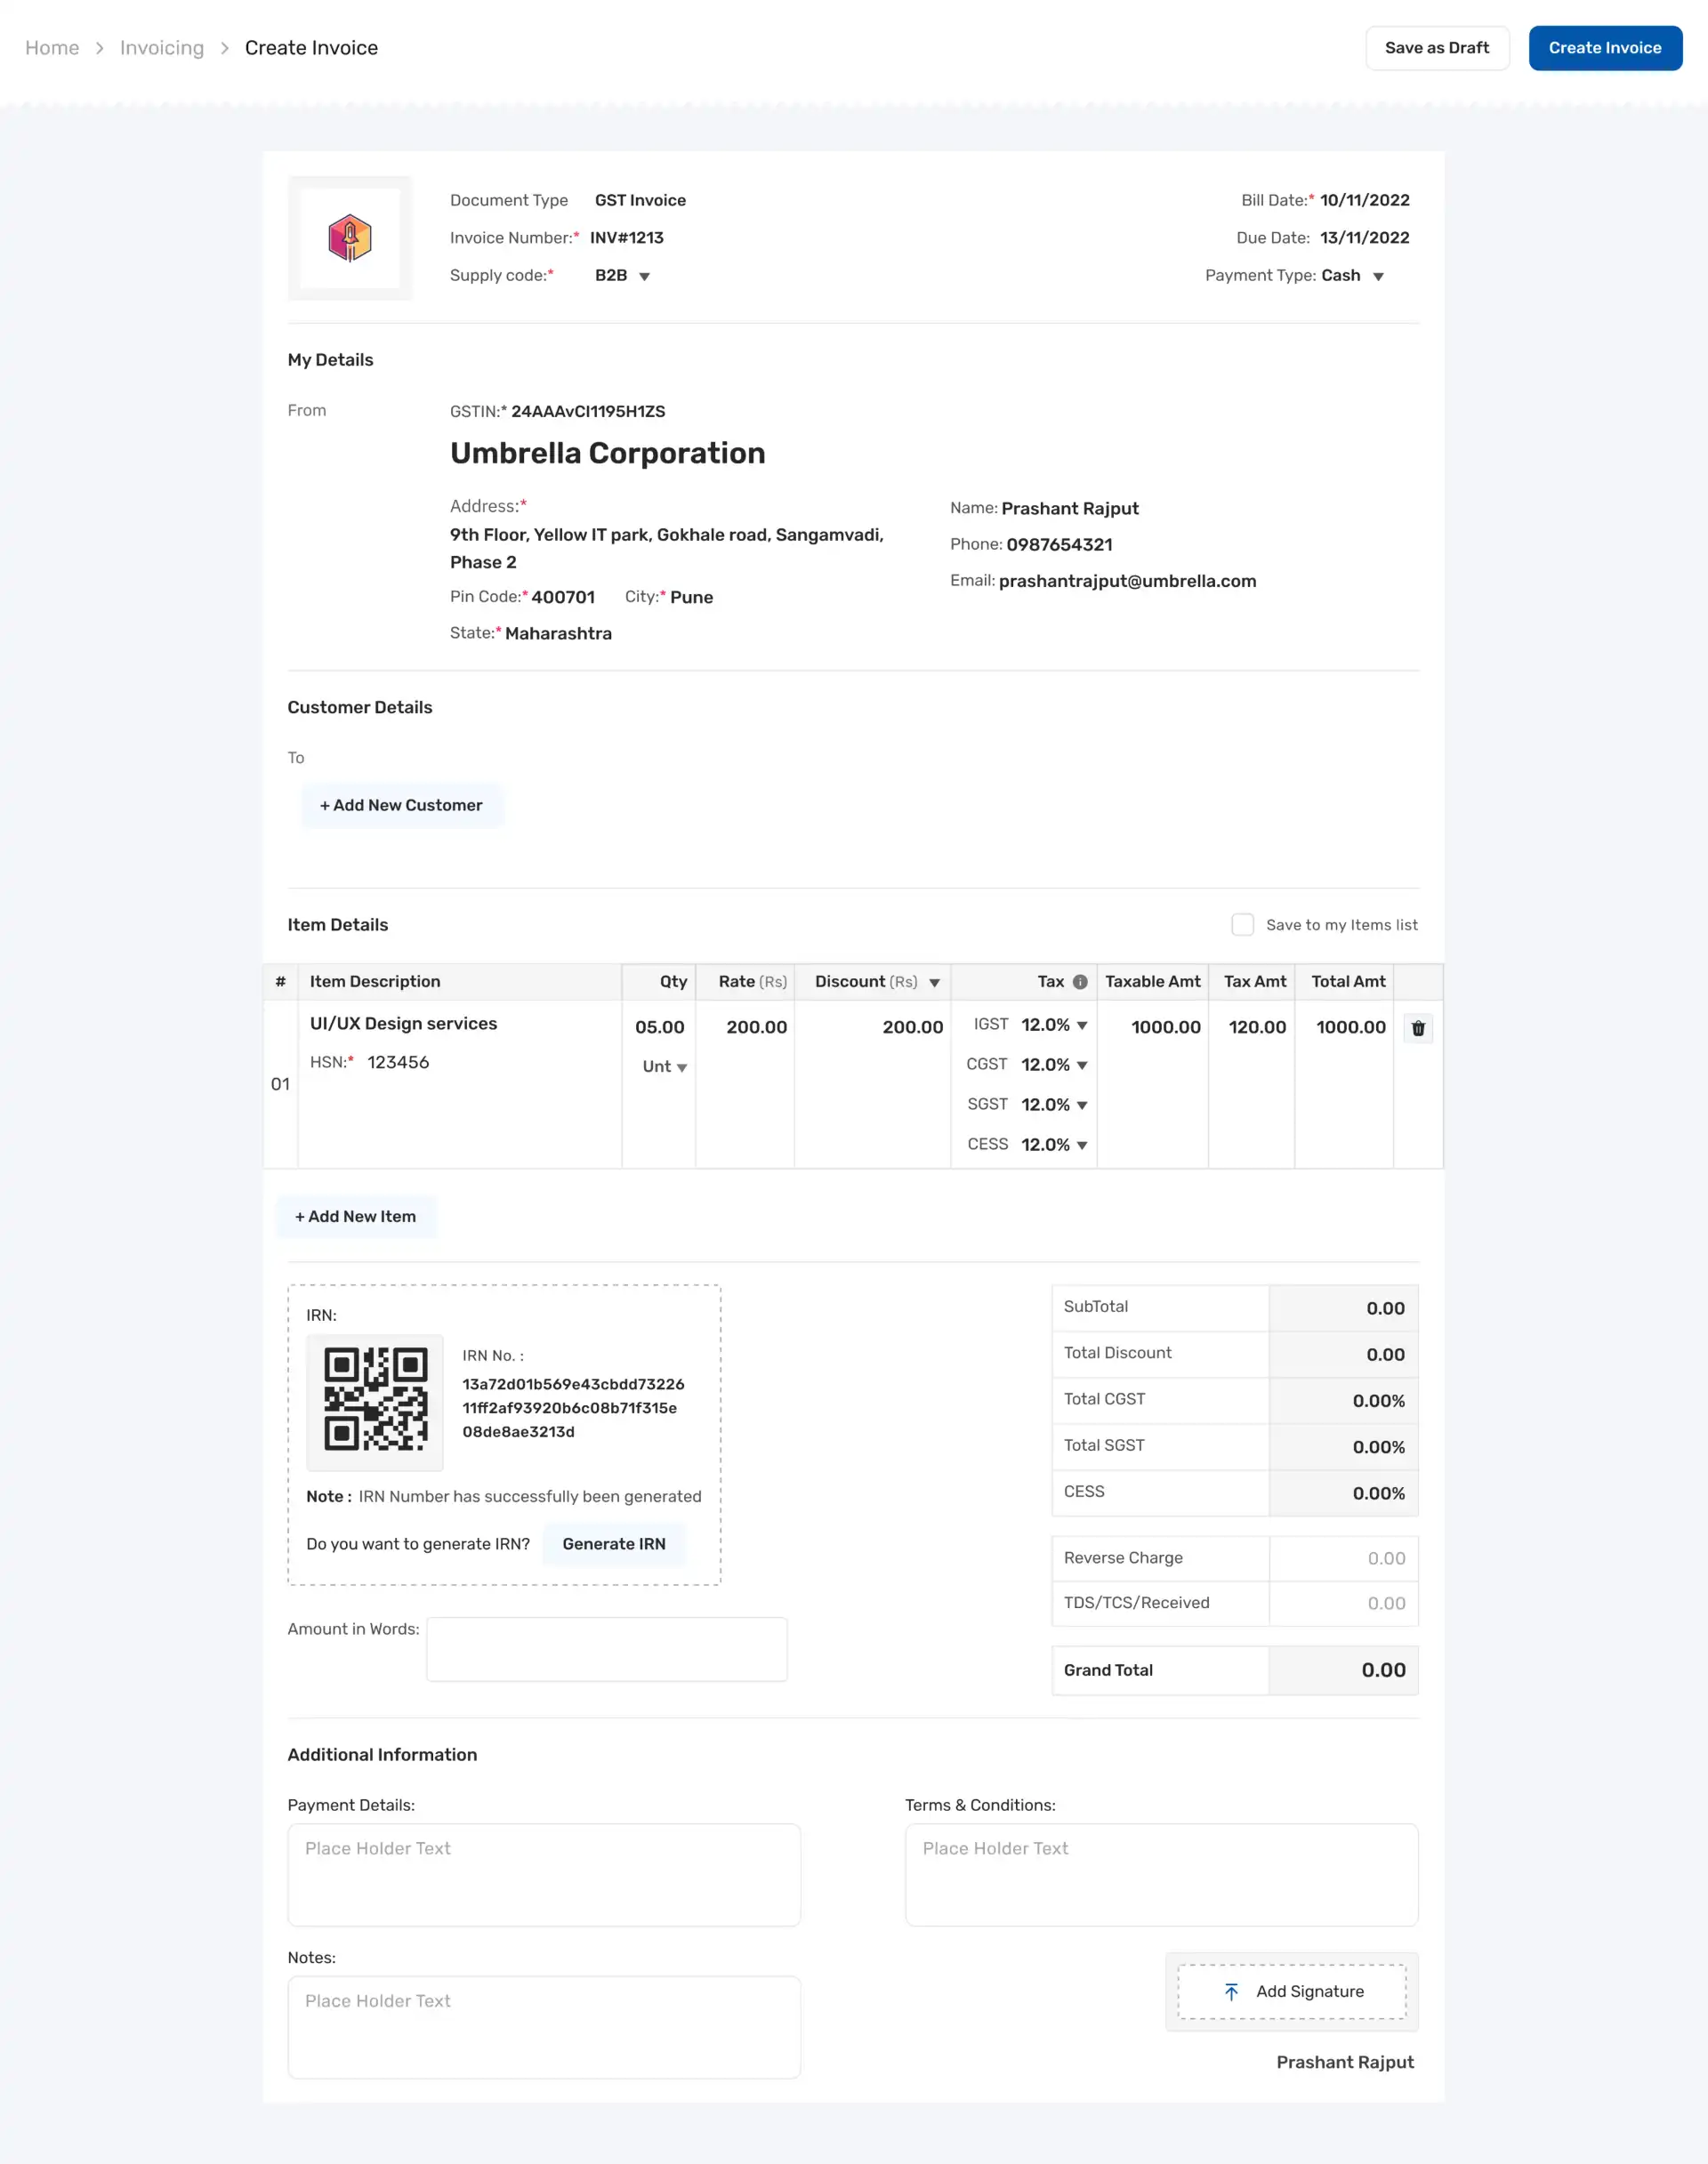 UI screen to create invoice and check details